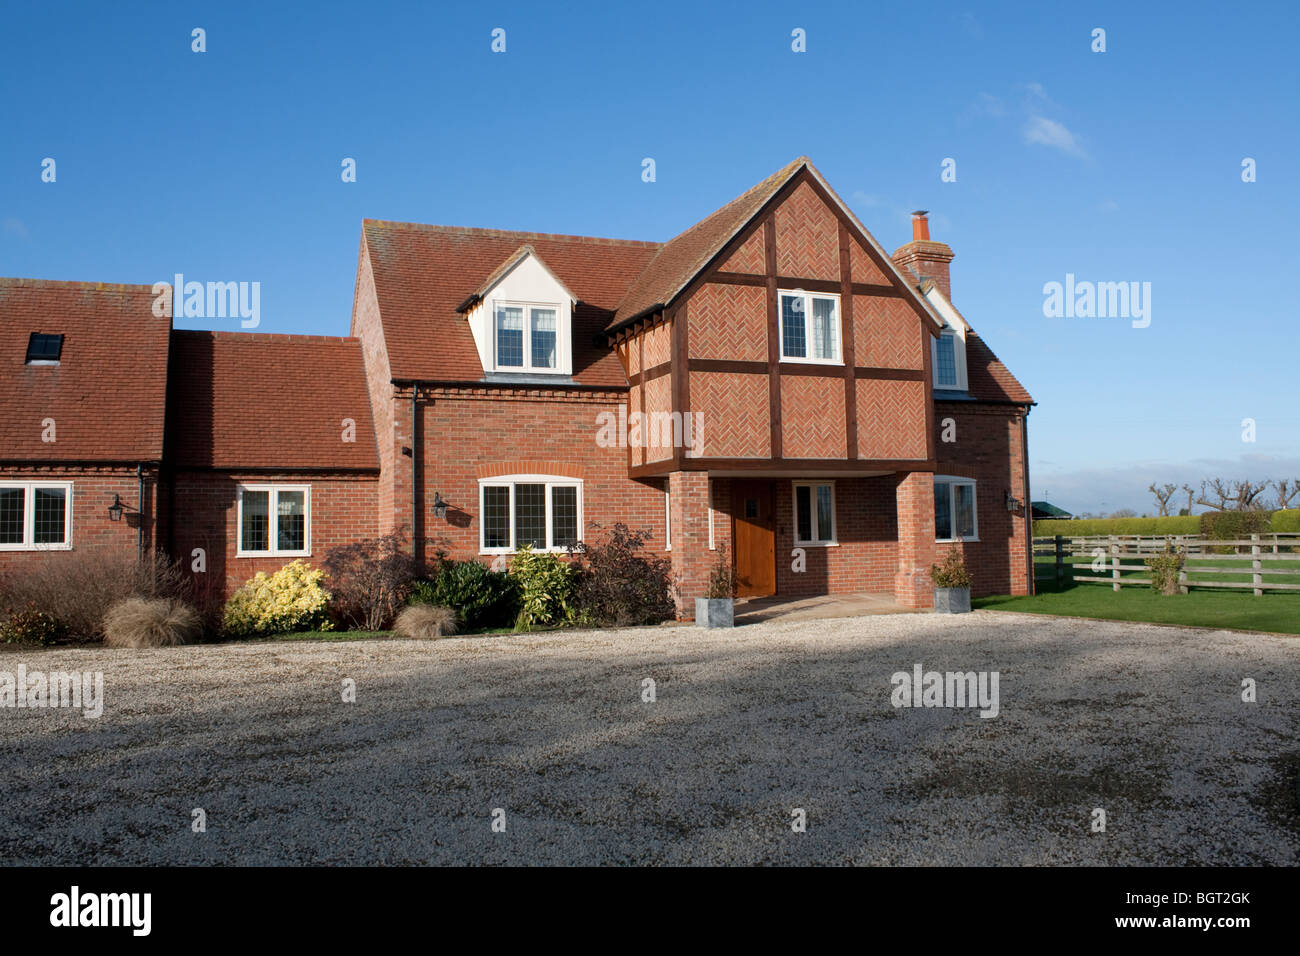 Large detached red brick country house with overhanging porch and herring bone brick patterns Admington Cotswolds UK Stock Photo